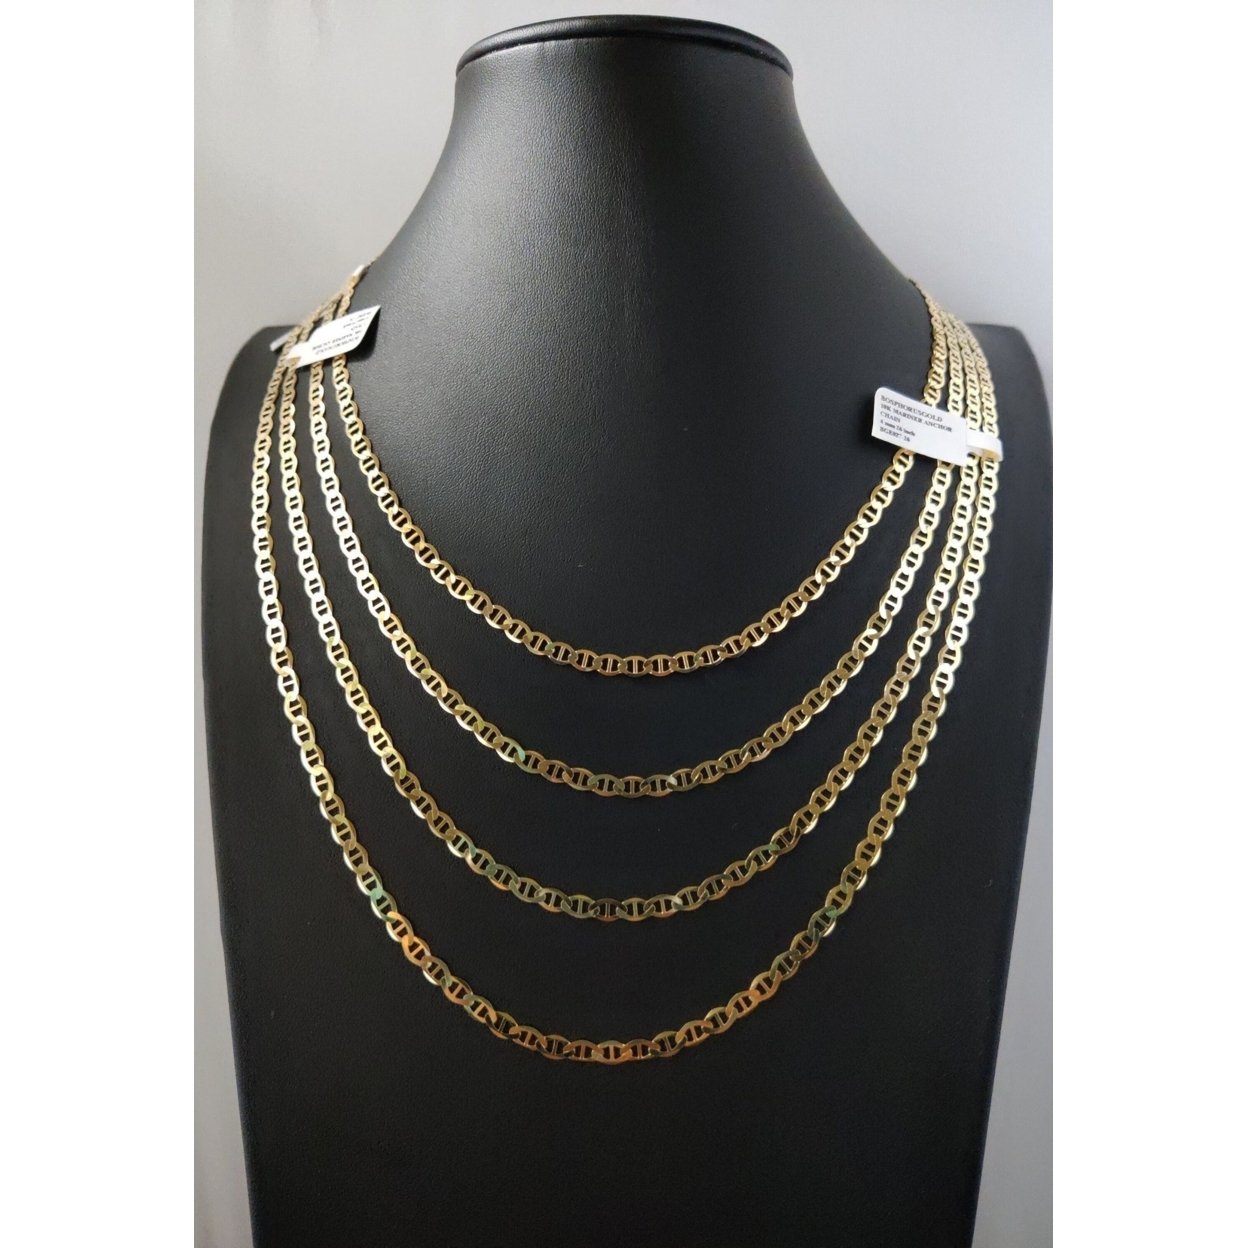 Yellow Gold Filled High Polish Finsh Chain Necklace,Mariner Chain Necklace,Necklace,Gold Necklace, Mariner Necklace, - 20''